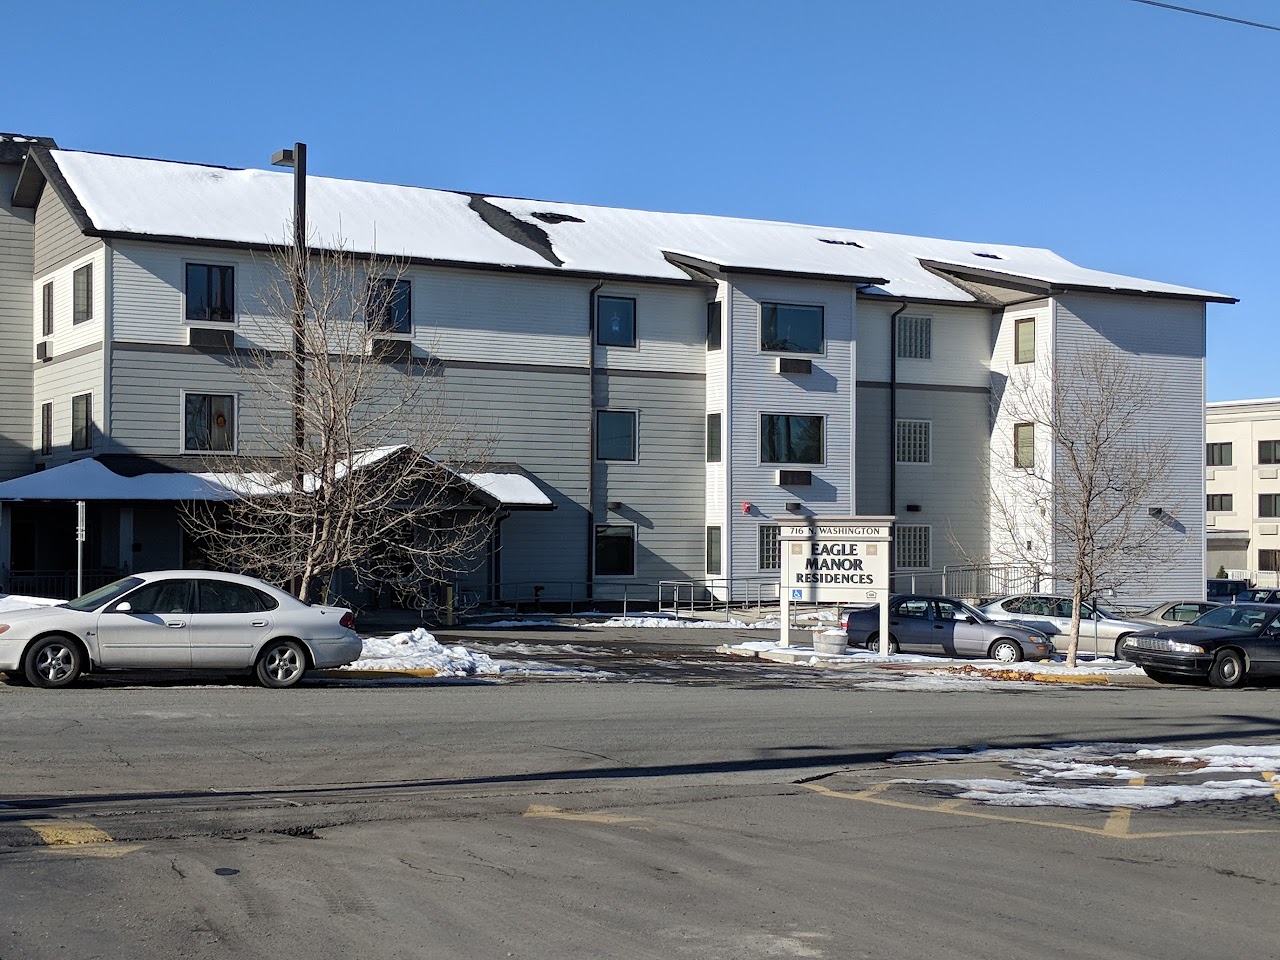 Photo of PENKAY EAGLES MANOR. Affordable housing located at 715 FEE ST HELENA, MT 59601